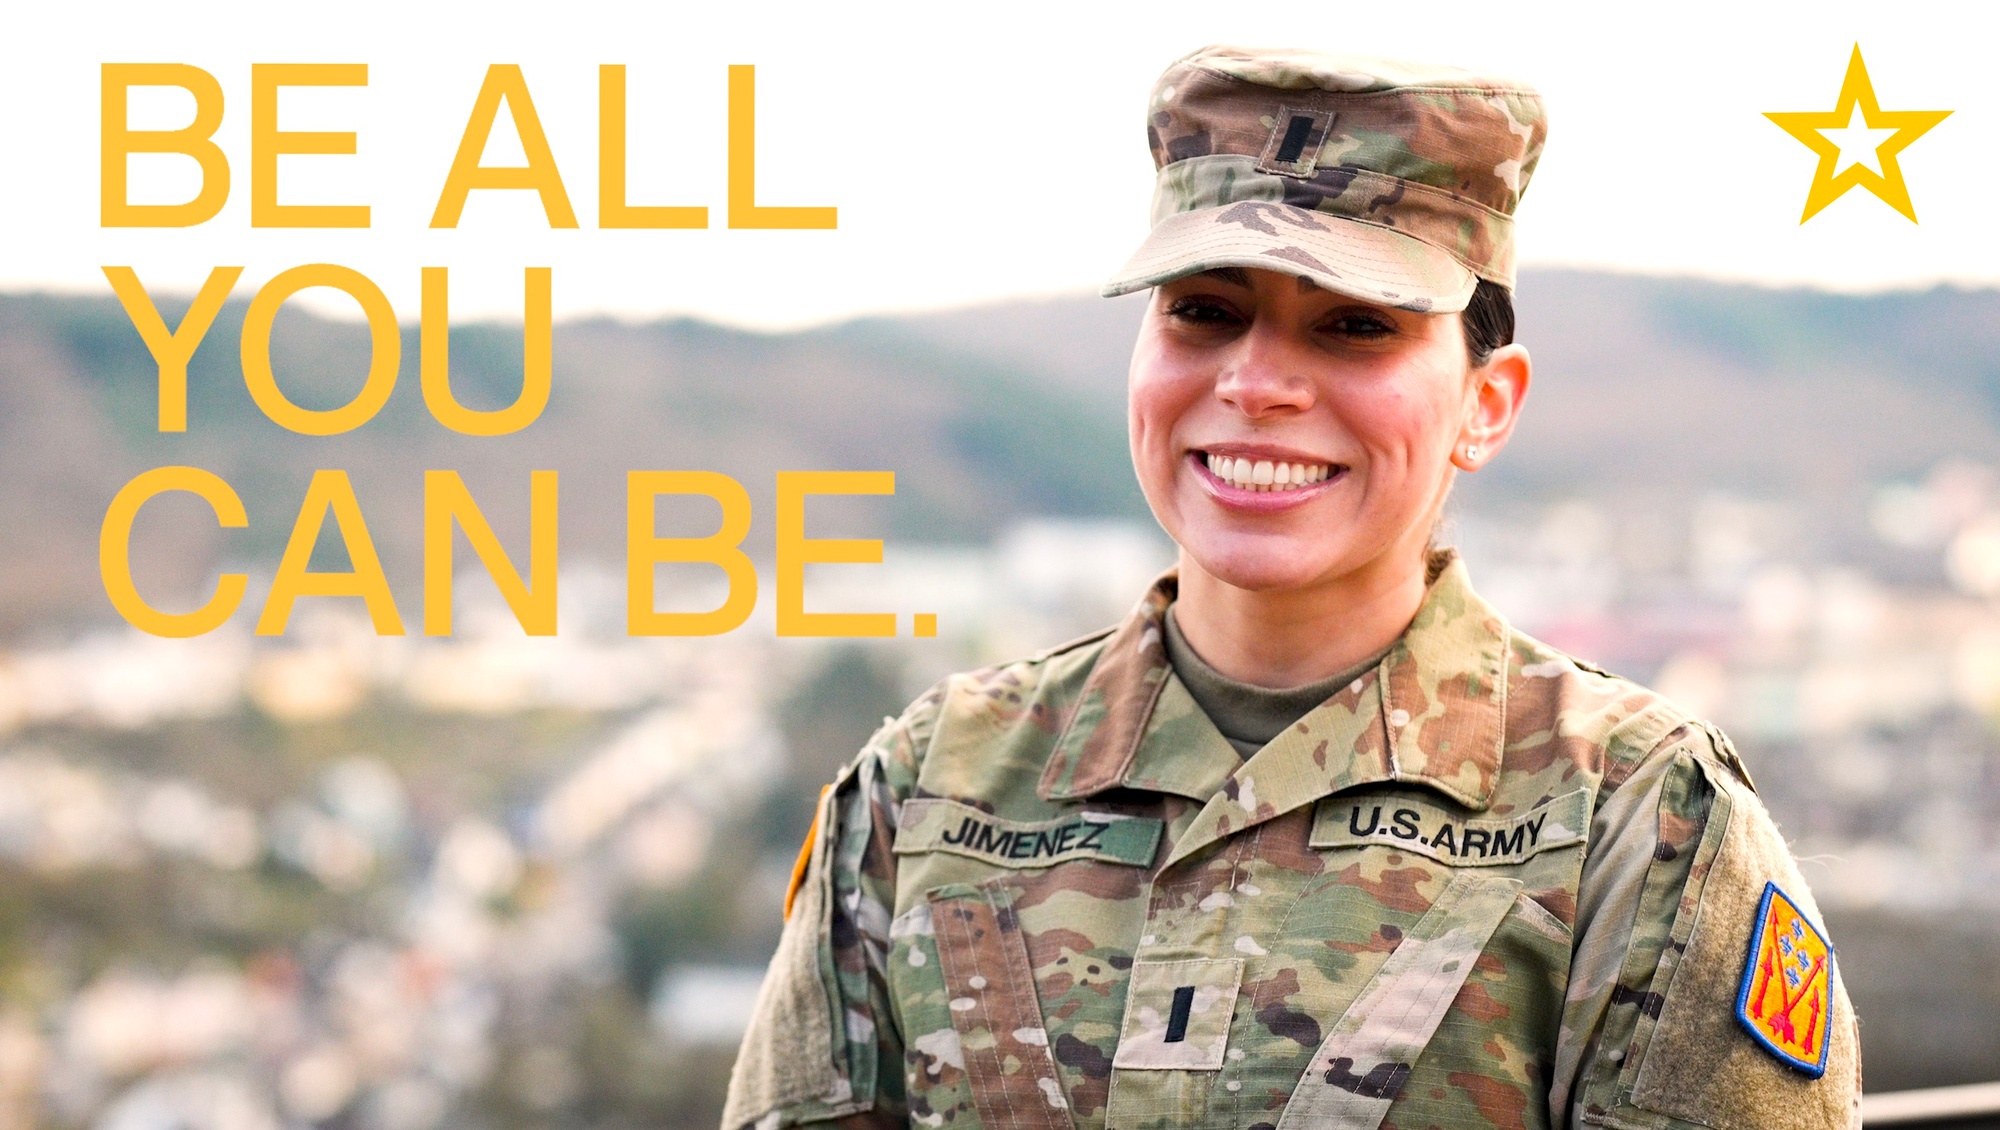 U.S. Army 1st Lt. Karla E. Jimenez Gracia, 5th battalion, 7th air defense artillery human resources OIC, shares why she continues to serve in honor of women's history month Mar. 19 in Baumholder, Germany. Women have played vital roles in our Army since the Revolutionary War. Today women serve in every career field in the Army, and are critical members of the Army team. (U.S. Army video by Sgt. Yesenia Cadavid)